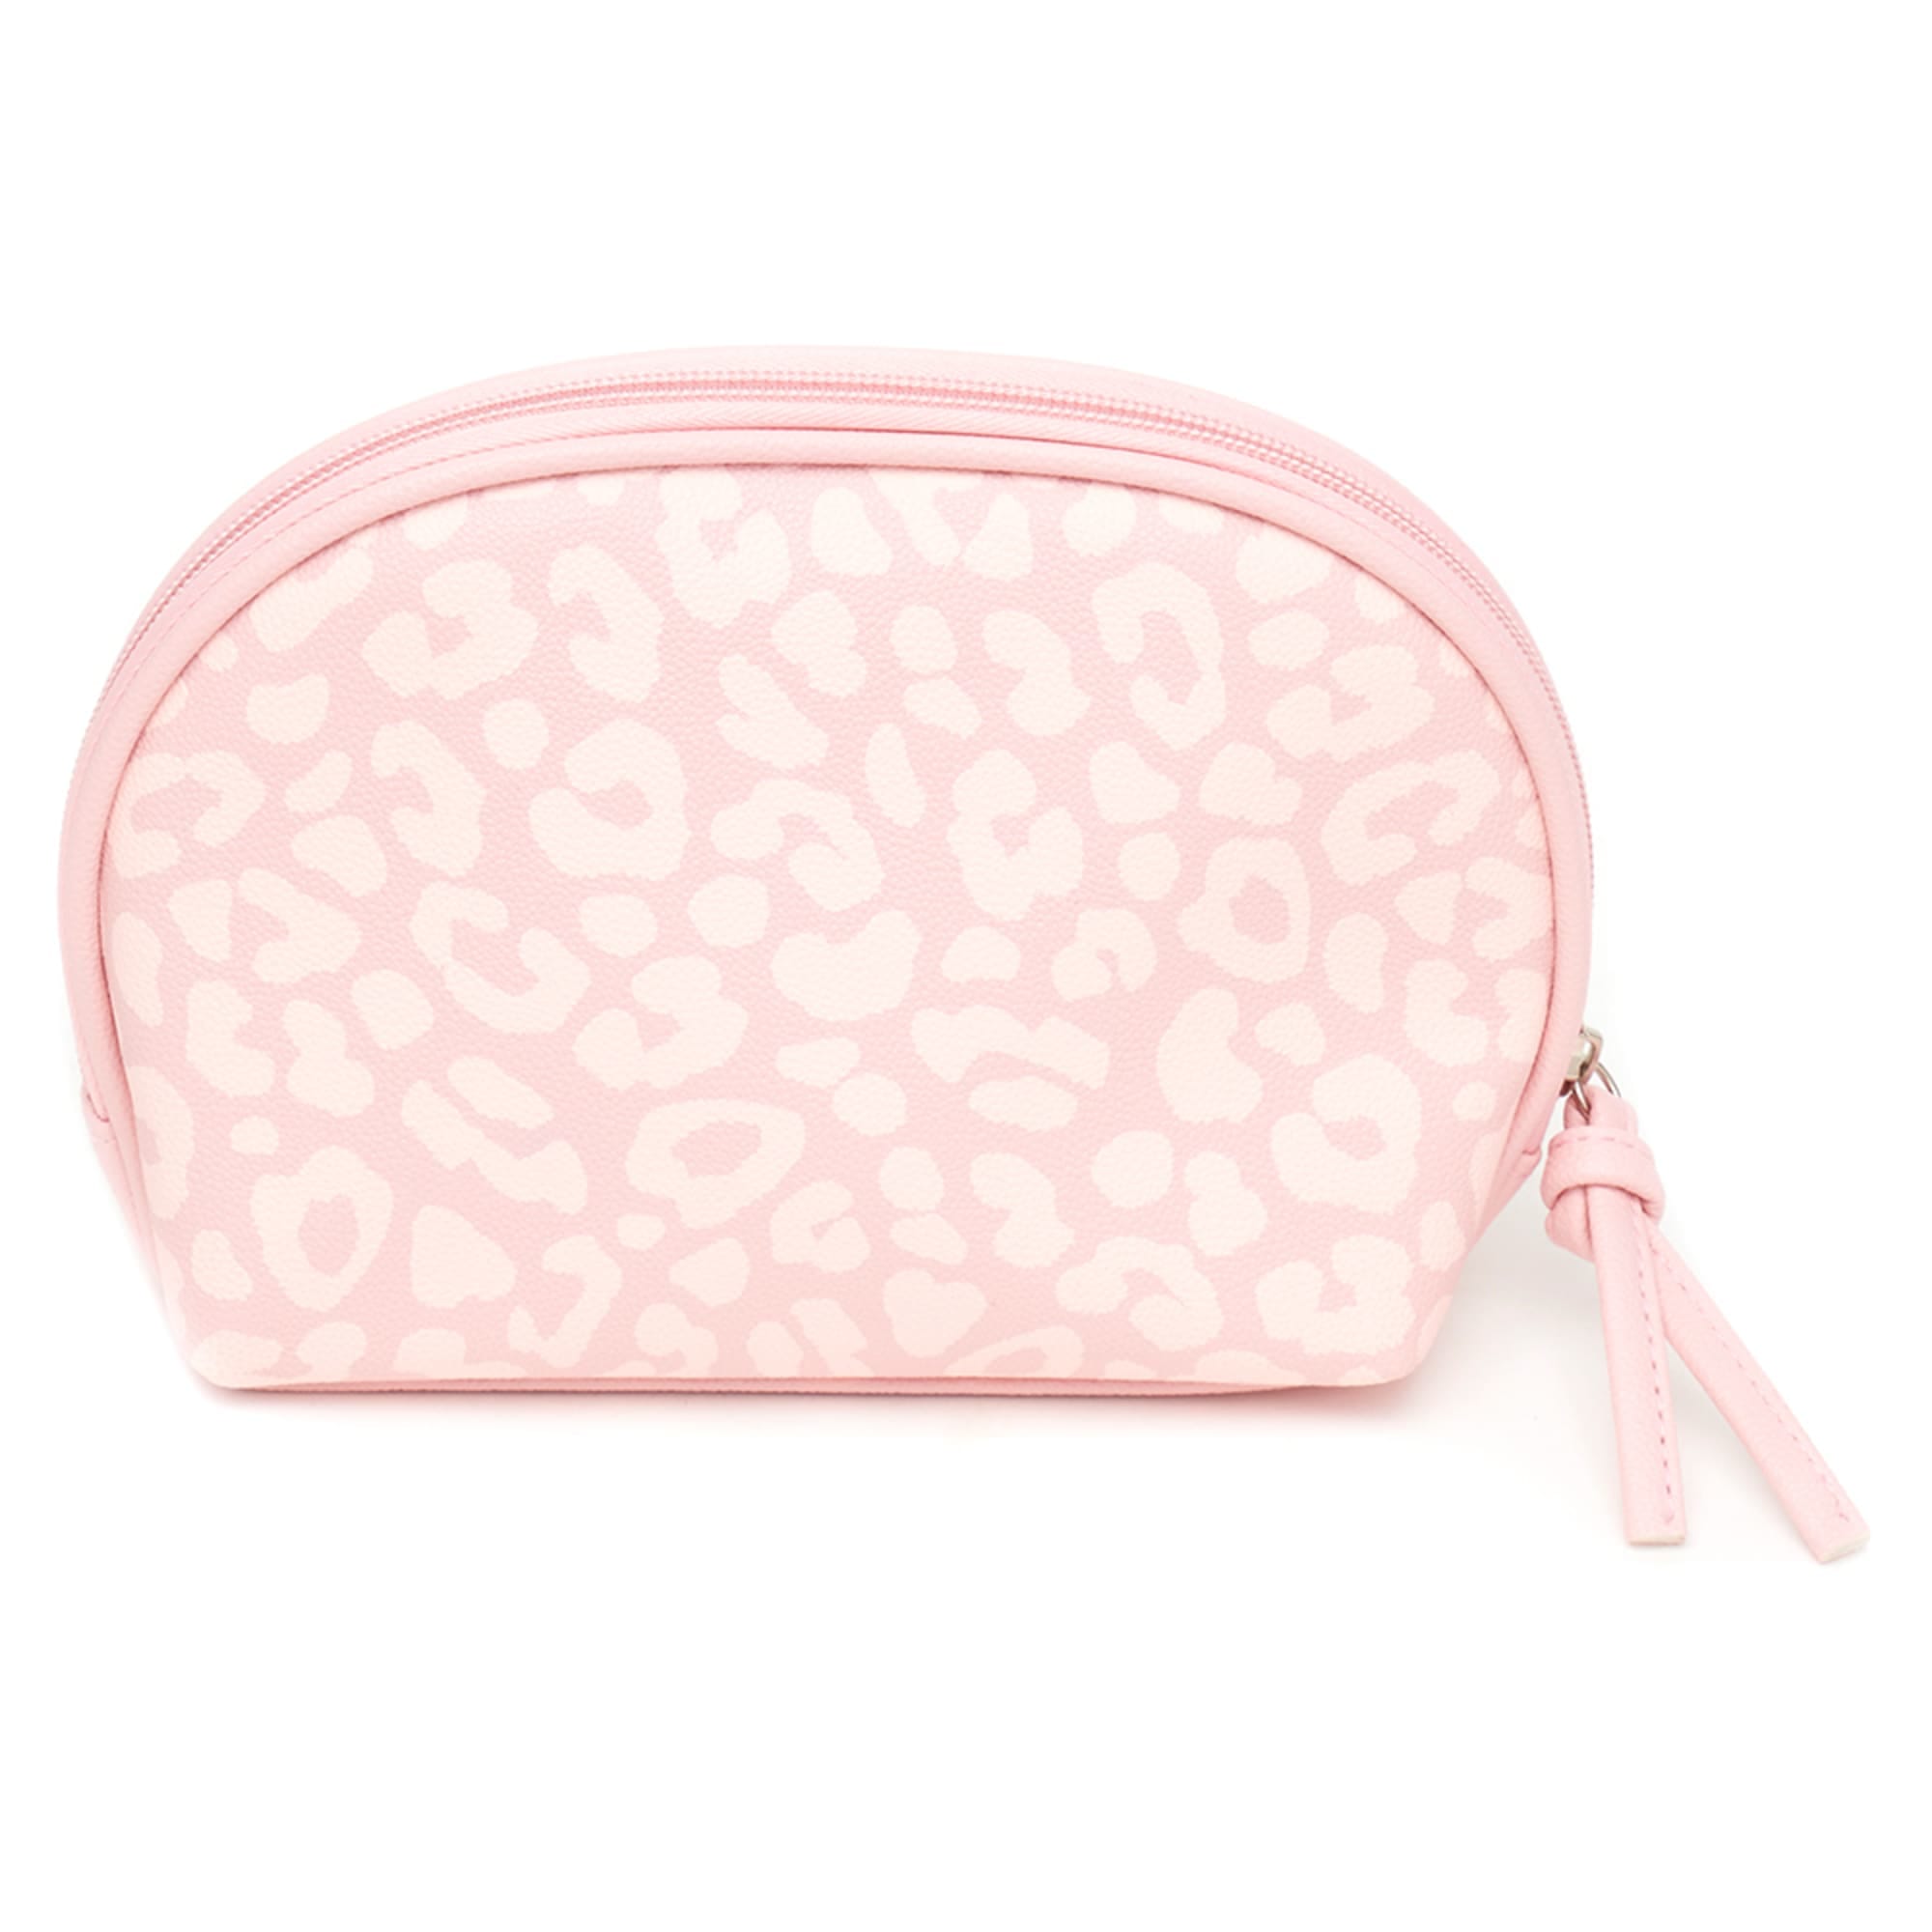 Home Basics Leopard Zippered Cosmetic Accessory Pouch, Pink $5.00 EACH, CASE PACK OF 12